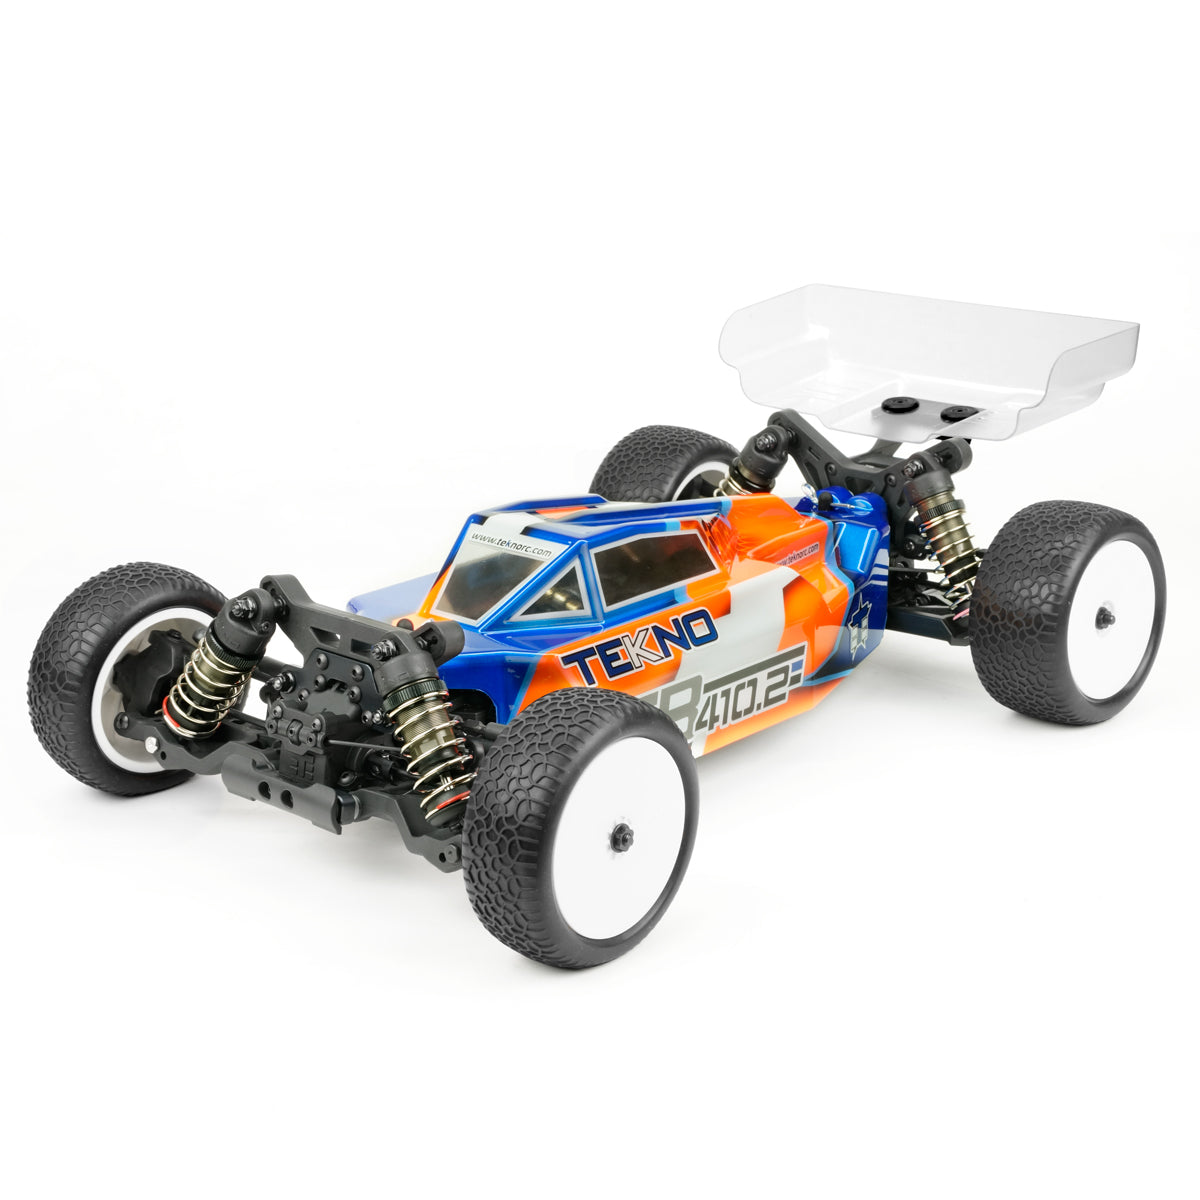 NEW EB410.2 1/10th 4WD Competition Electric Buggy Kit